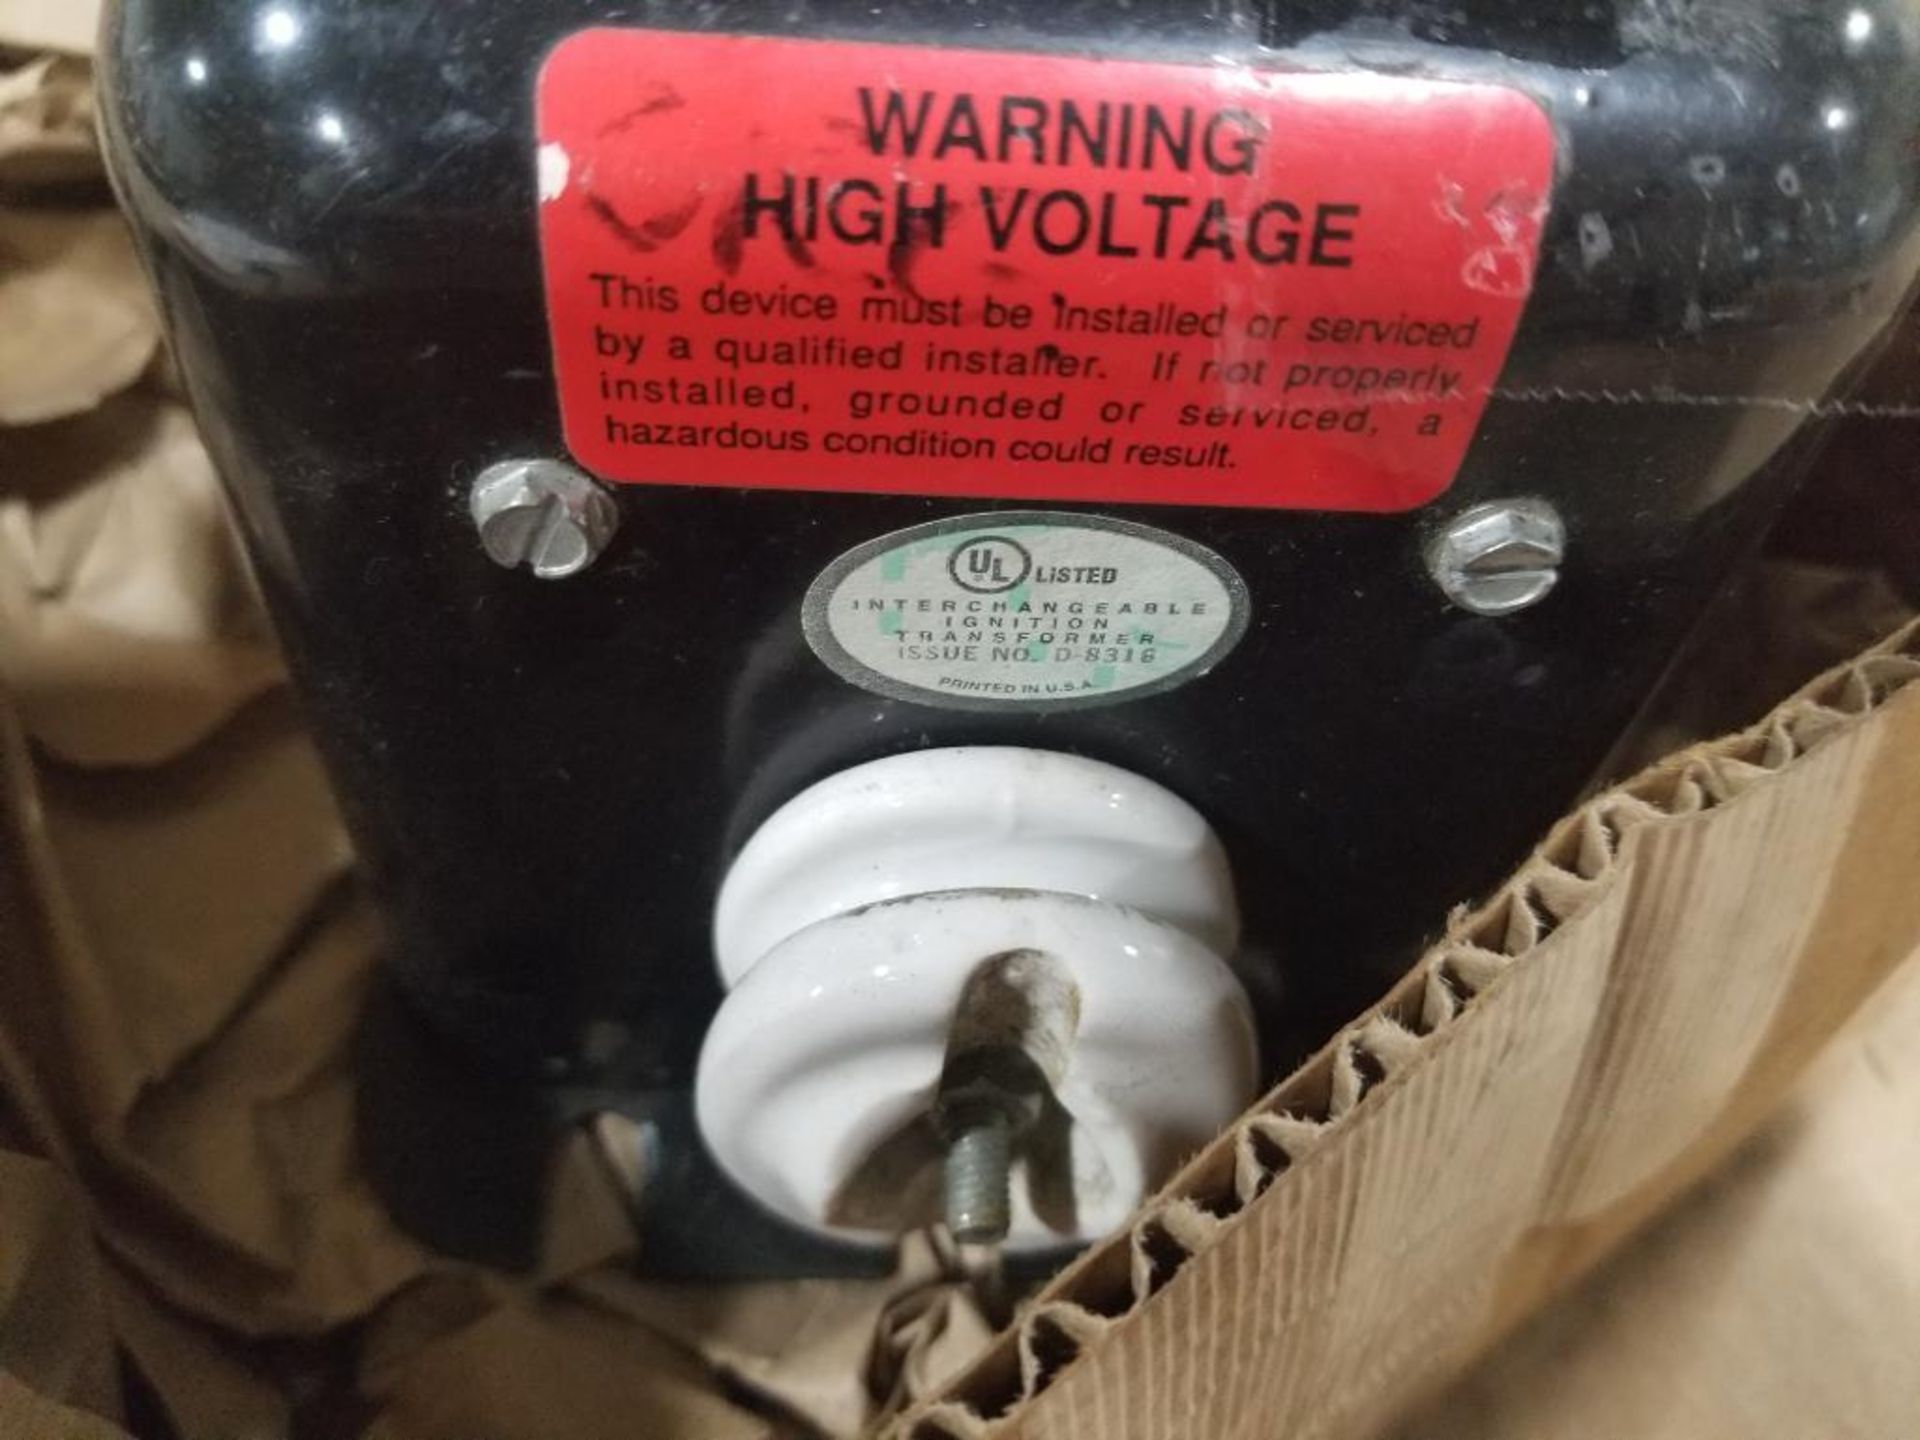 High voltage interchangeable ingnition transformer. Part number D-8316. - Image 2 of 4